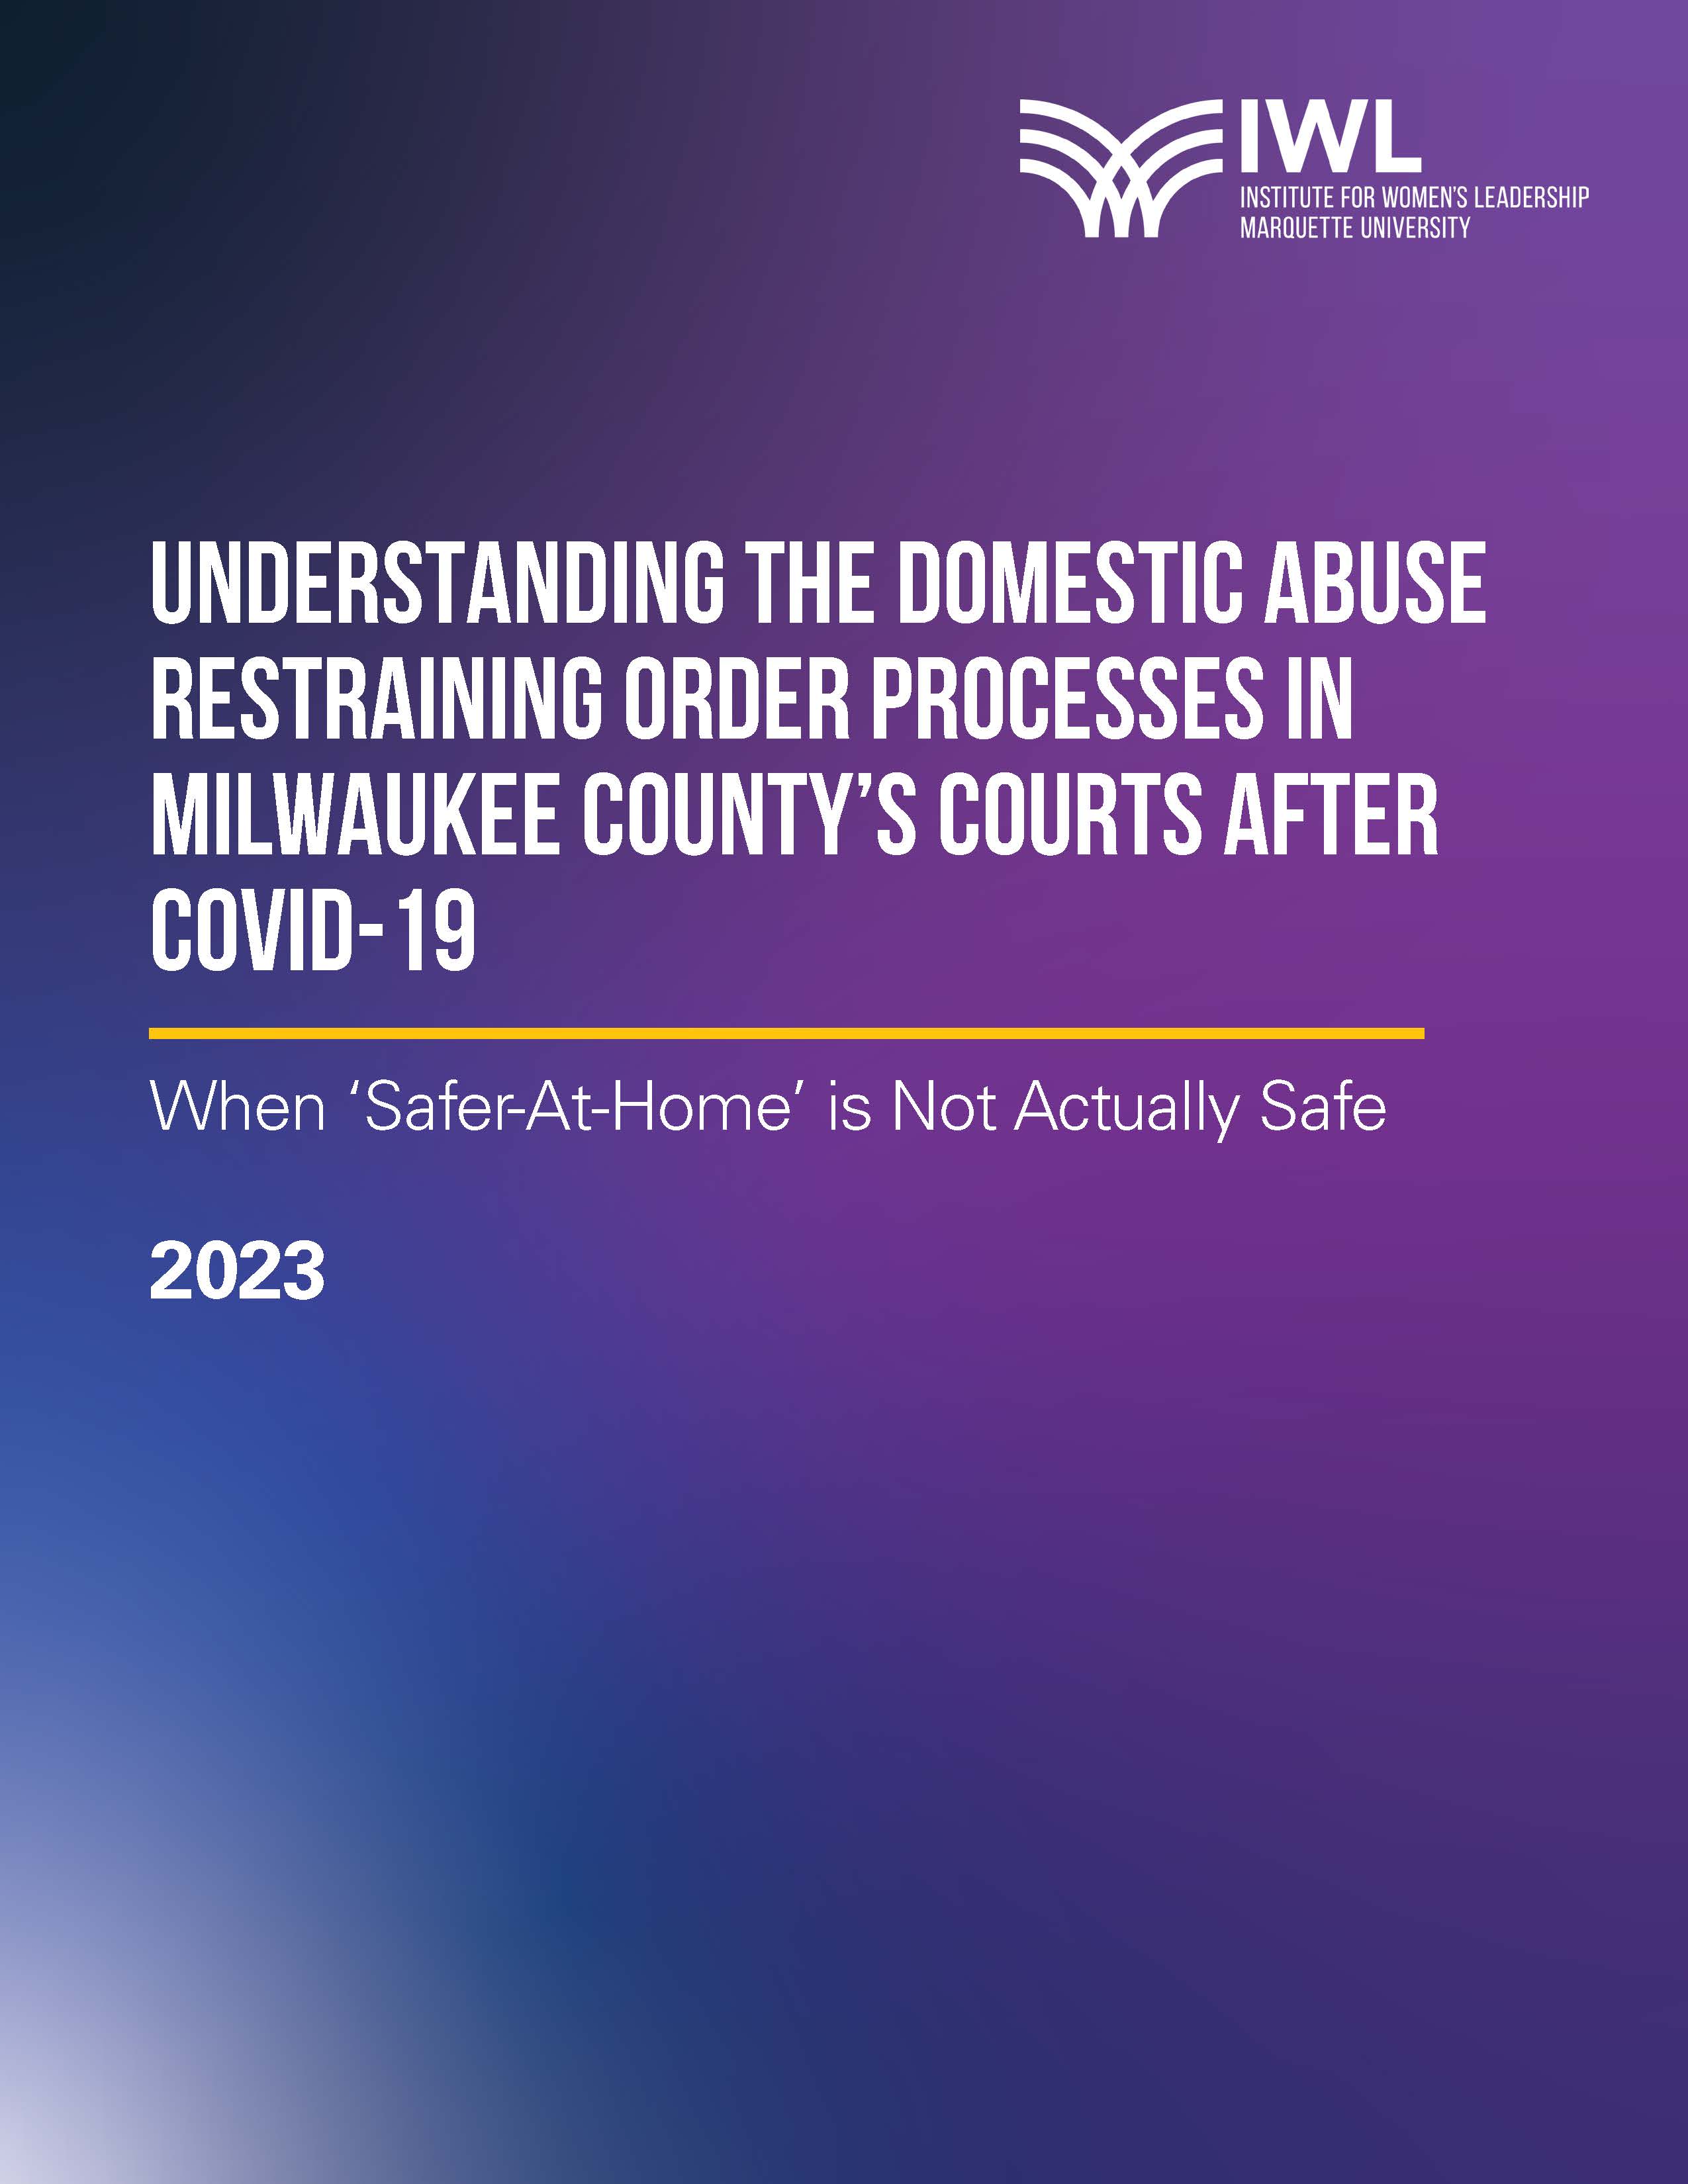 Front cover of "Understanding the Domestic Abuse Restraining Order Processes in Milwaukee County’s Court After COVID-19" white paper